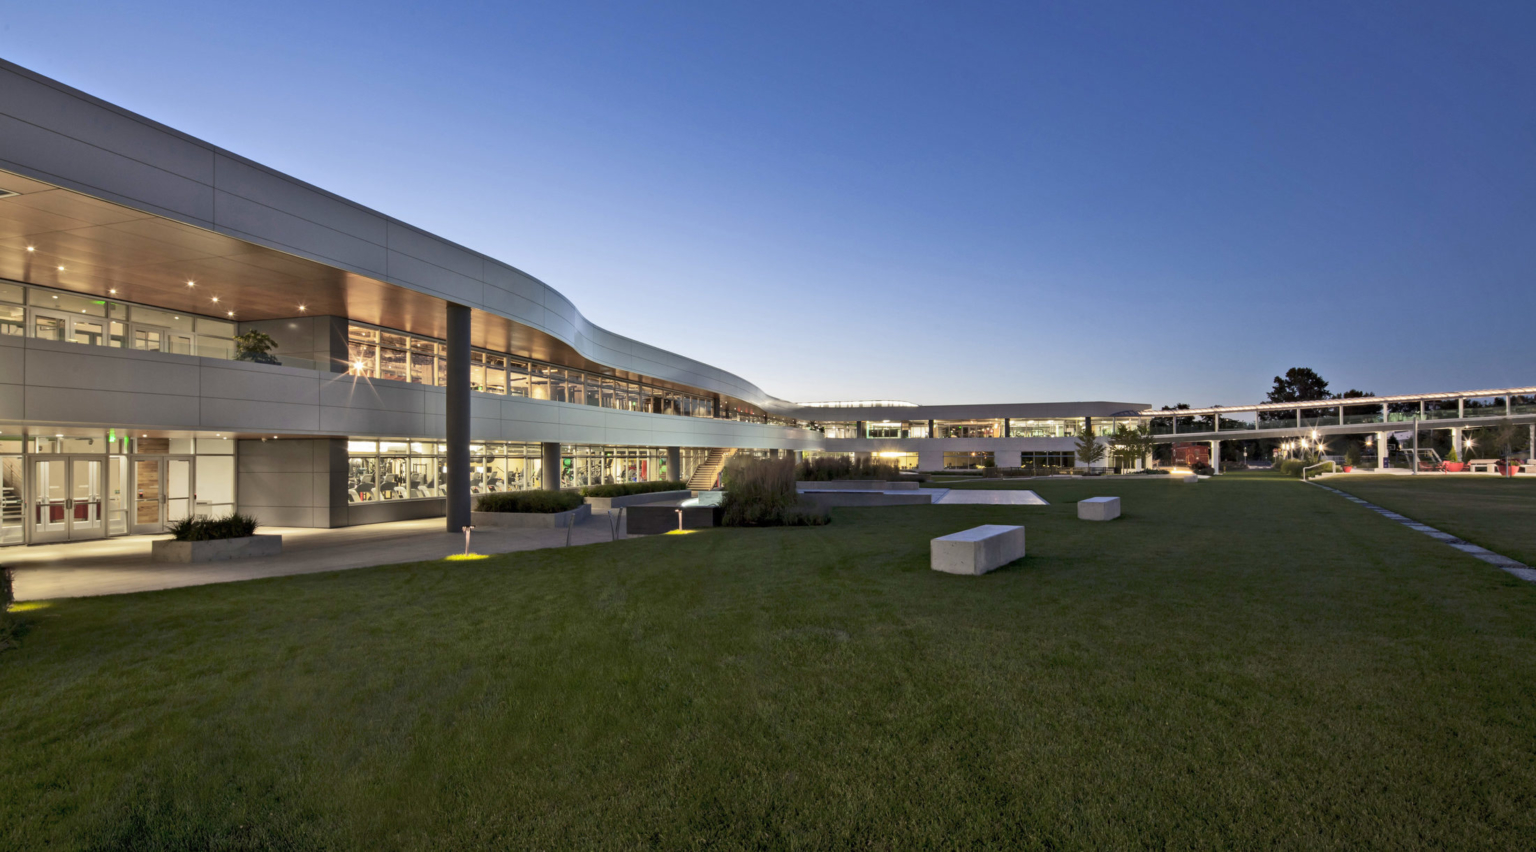 curvaceous two story campus building illuminated at dusk